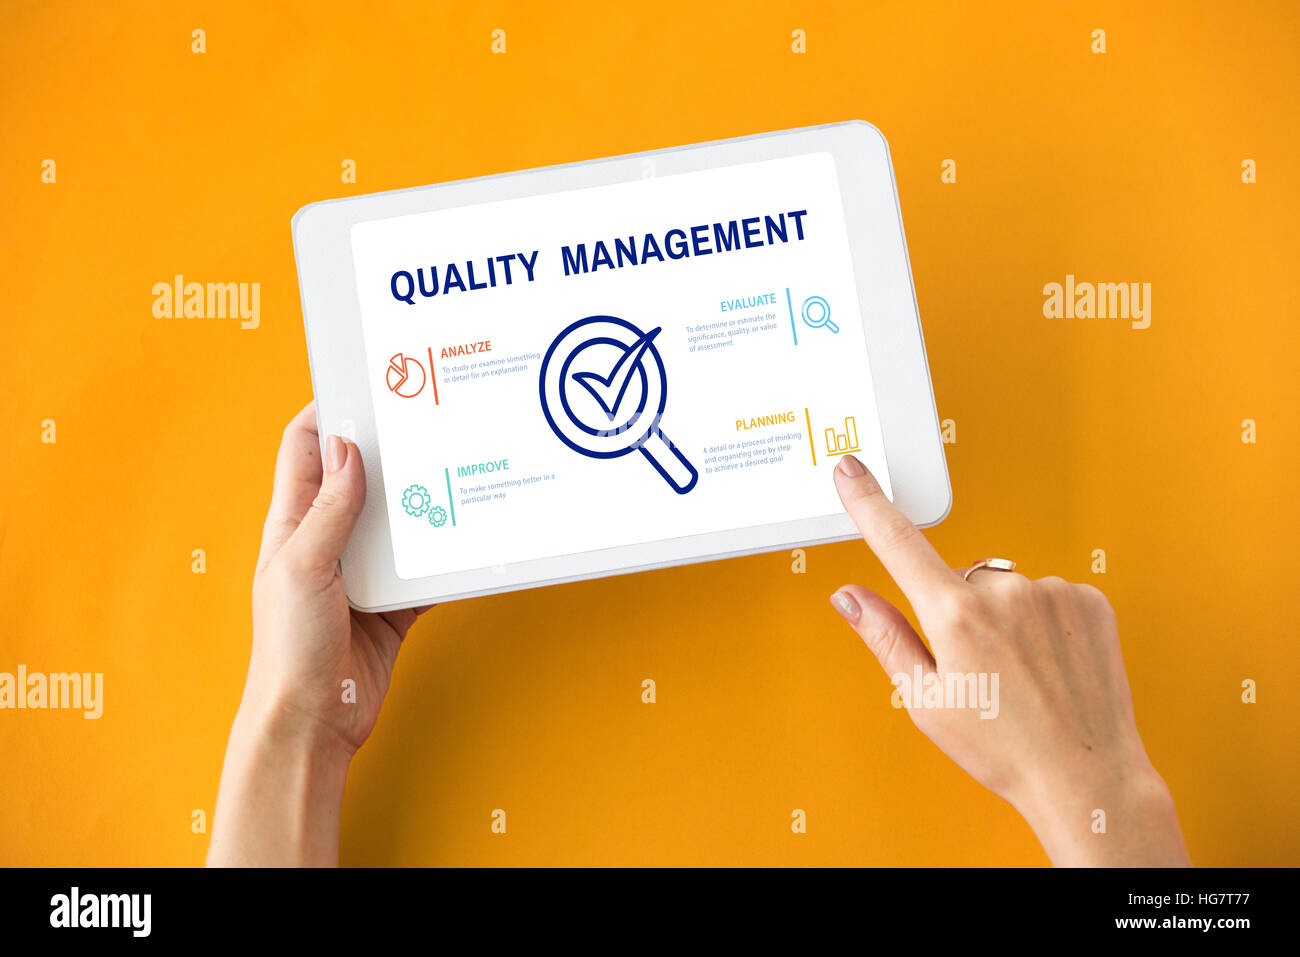 Quality Management Check Icon Concept Stock Photo